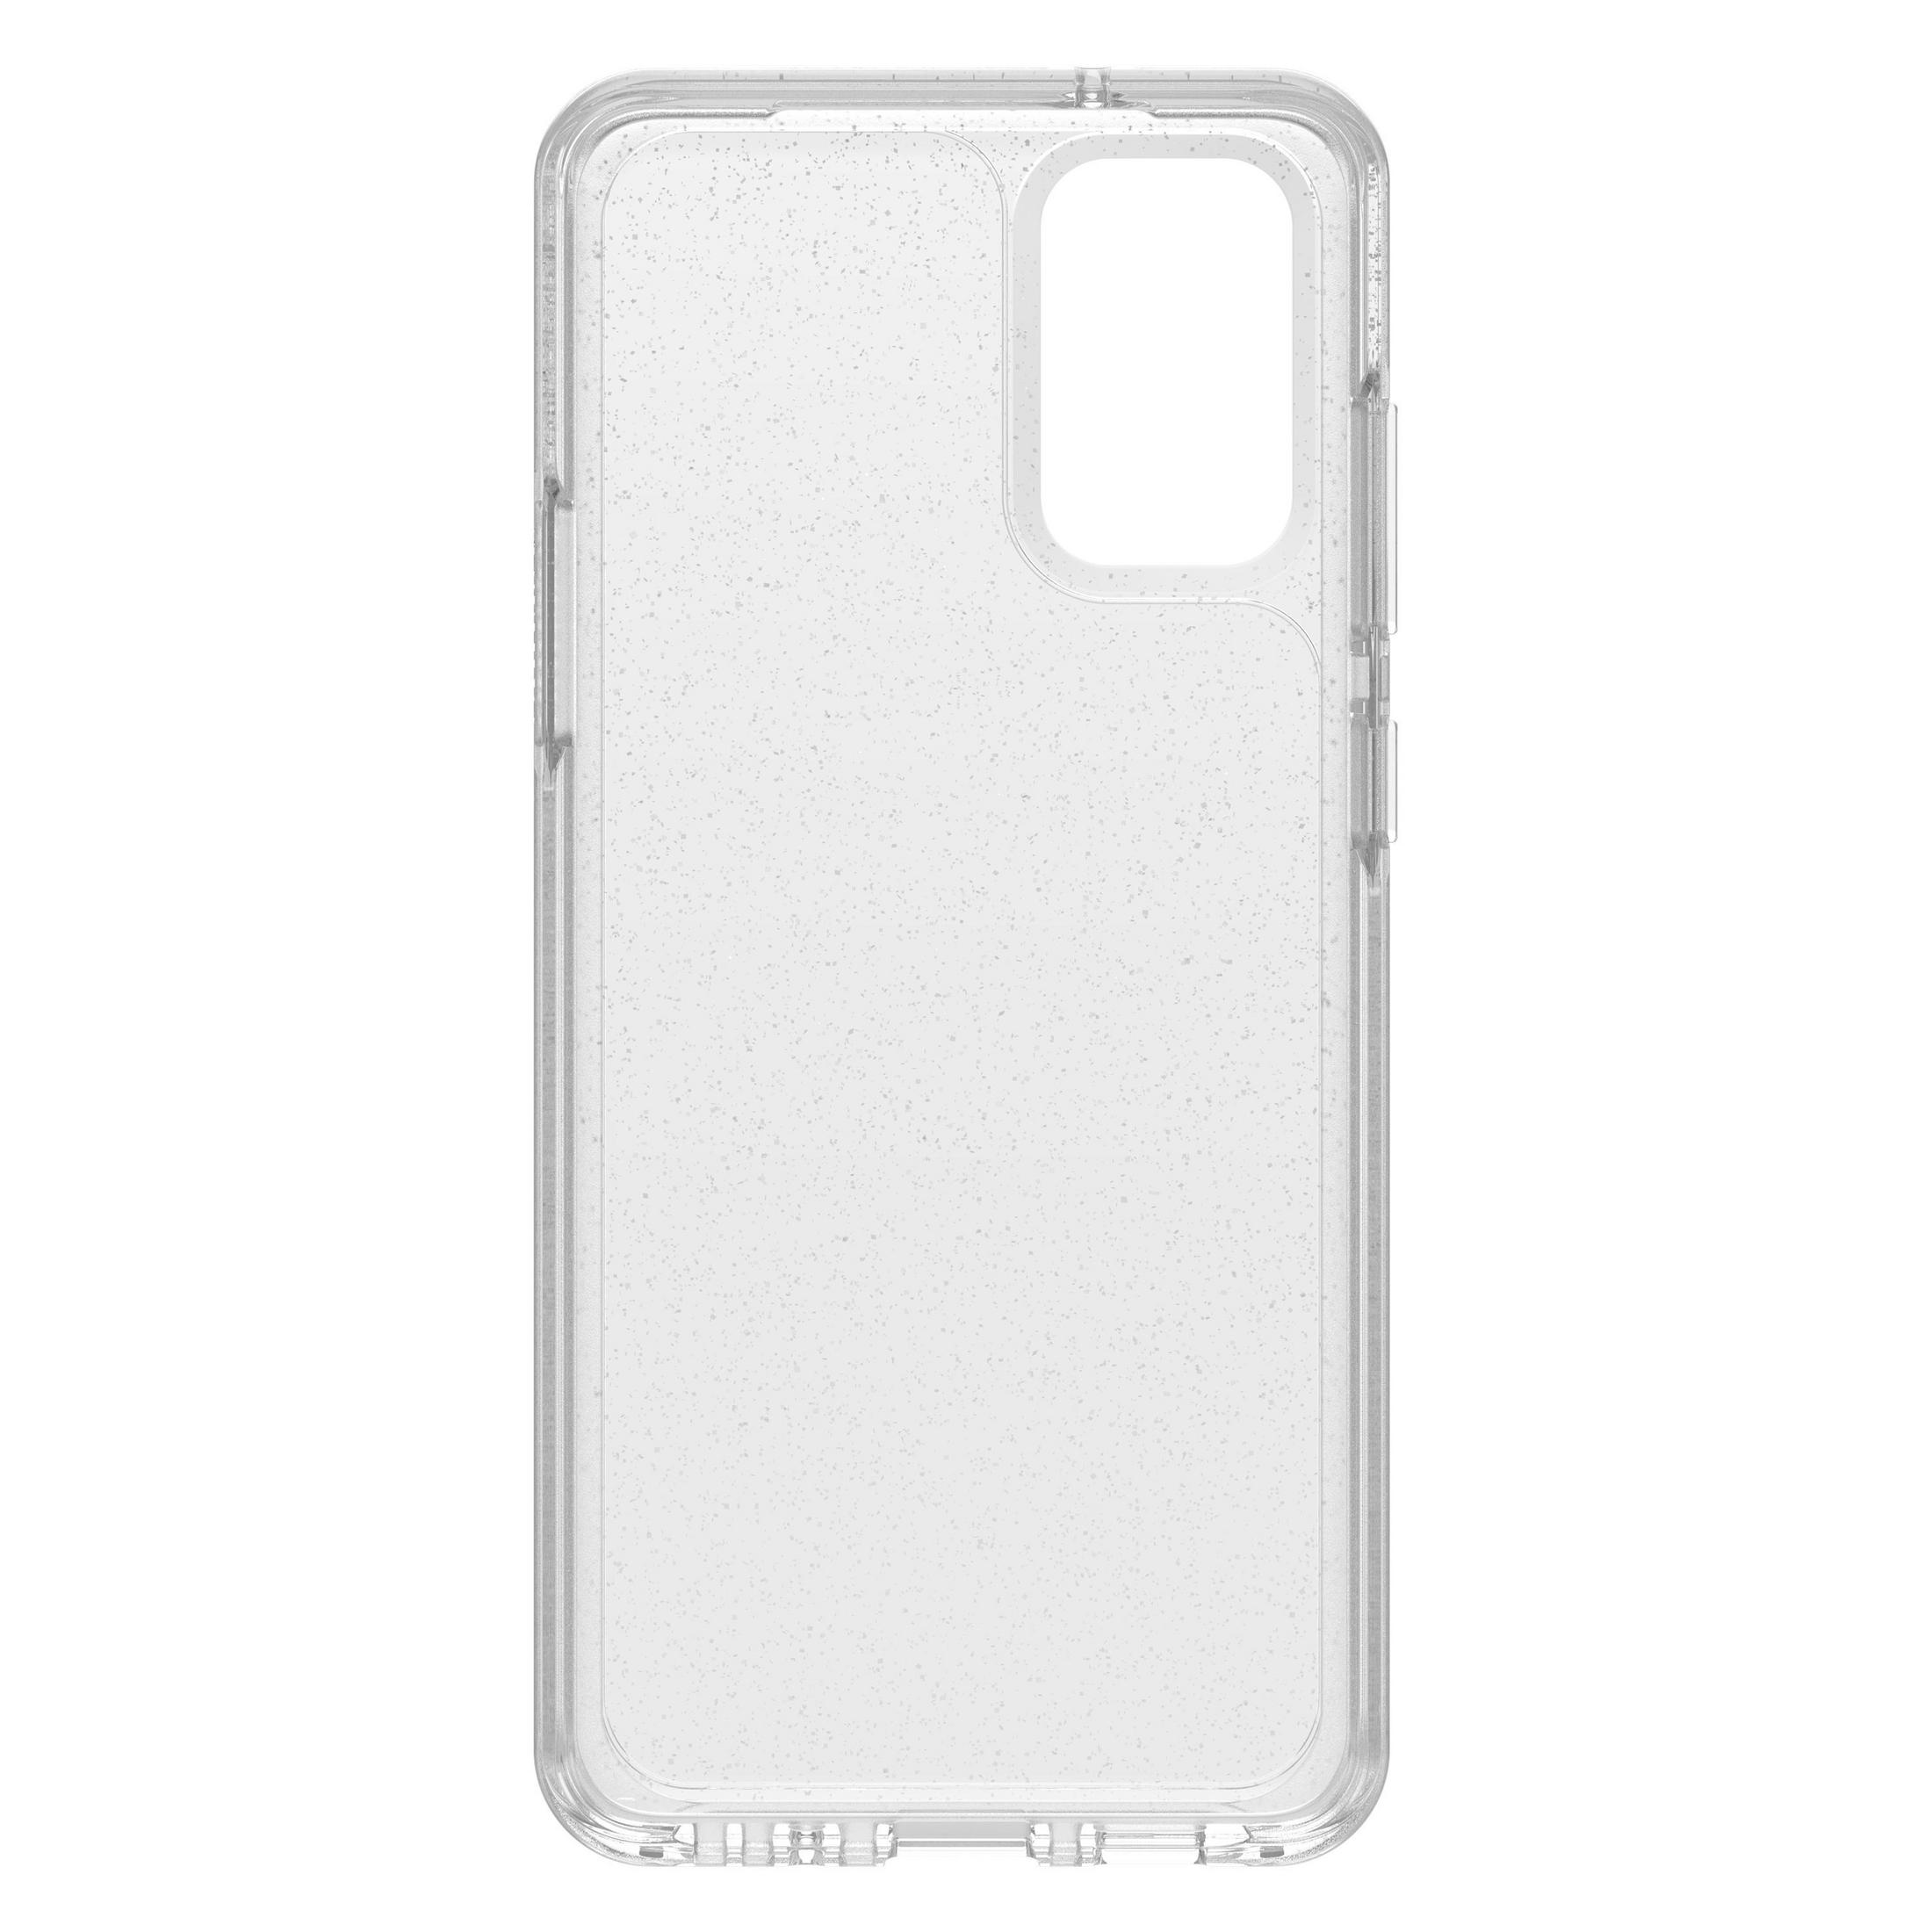 OTTERBOX 77-64282 SYMMETRY STARDUST Backcover, Galaxy CLEAR, Transparent S20+ Samsung, CLEAR S20